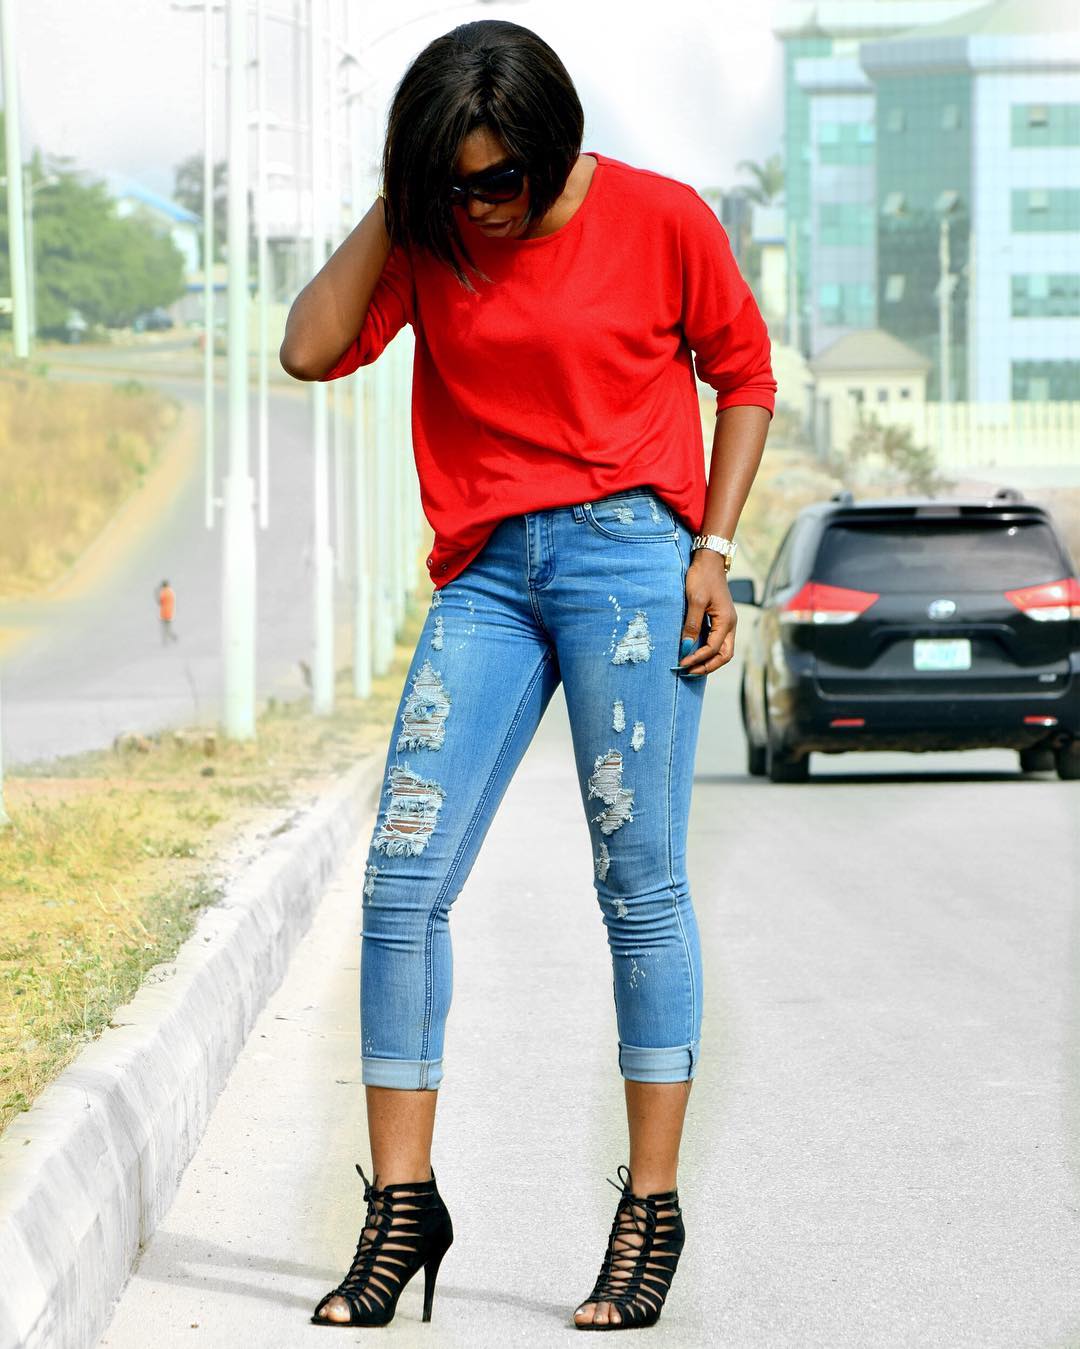 how-to-wear-red-for-festive-holiday-holiday-fashionpolicenigeria-6